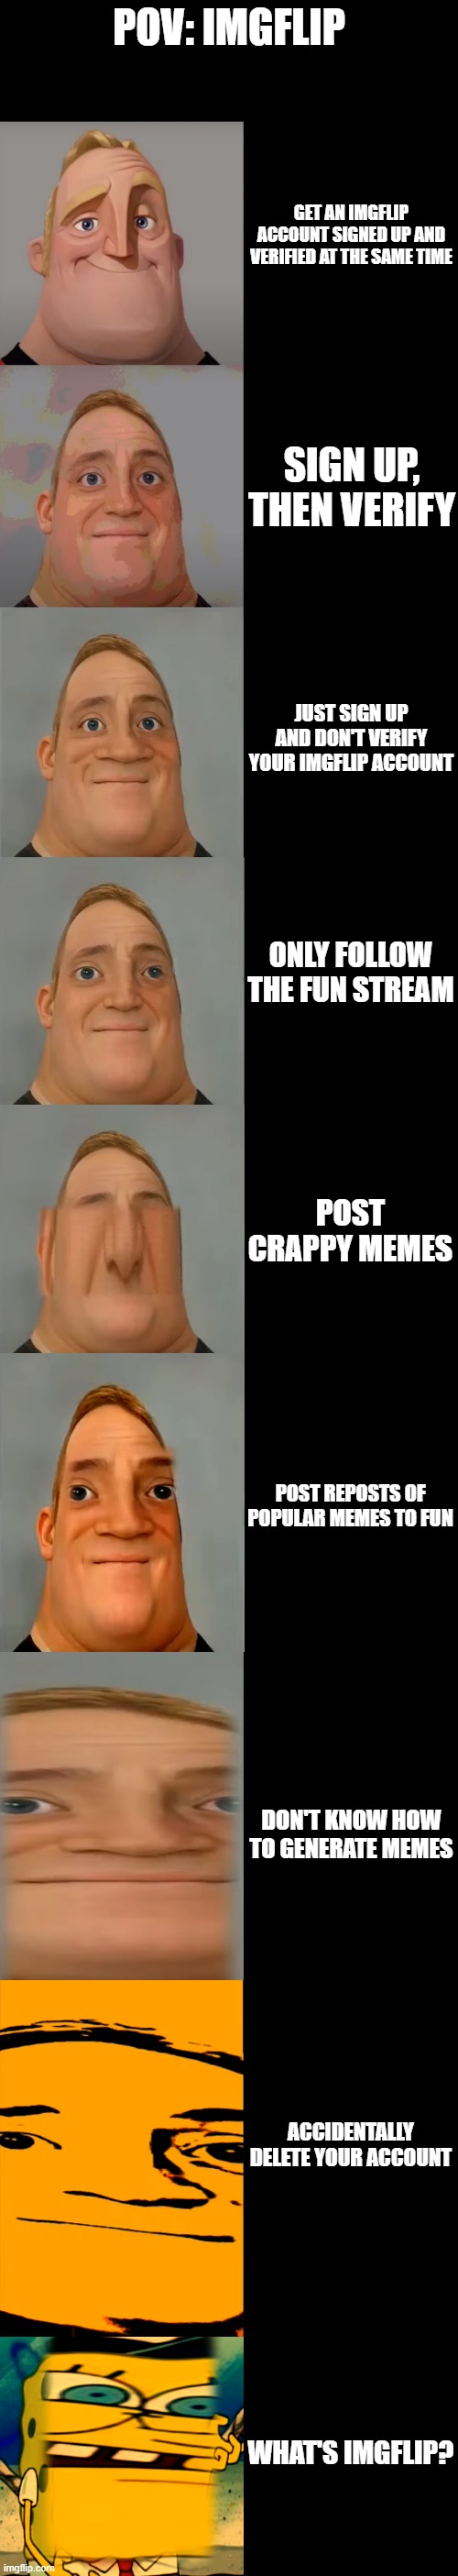 Mr Incredible becoming Idiot template | POV: IMGFLIP; GET AN IMGFLIP ACCOUNT SIGNED UP AND VERIFIED AT THE SAME TIME; SIGN UP, THEN VERIFY; JUST SIGN UP AND DON'T VERIFY YOUR IMGFLIP ACCOUNT; ONLY FOLLOW THE FUN STREAM; POST CRAPPY MEMES; POST REPOSTS OF POPULAR MEMES TO FUN; DON'T KNOW HOW TO GENERATE MEMES; ACCIDENTALLY DELETE YOUR ACCOUNT; WHAT'S IMGFLIP? | image tagged in mr incredible becoming idiot template | made w/ Imgflip meme maker